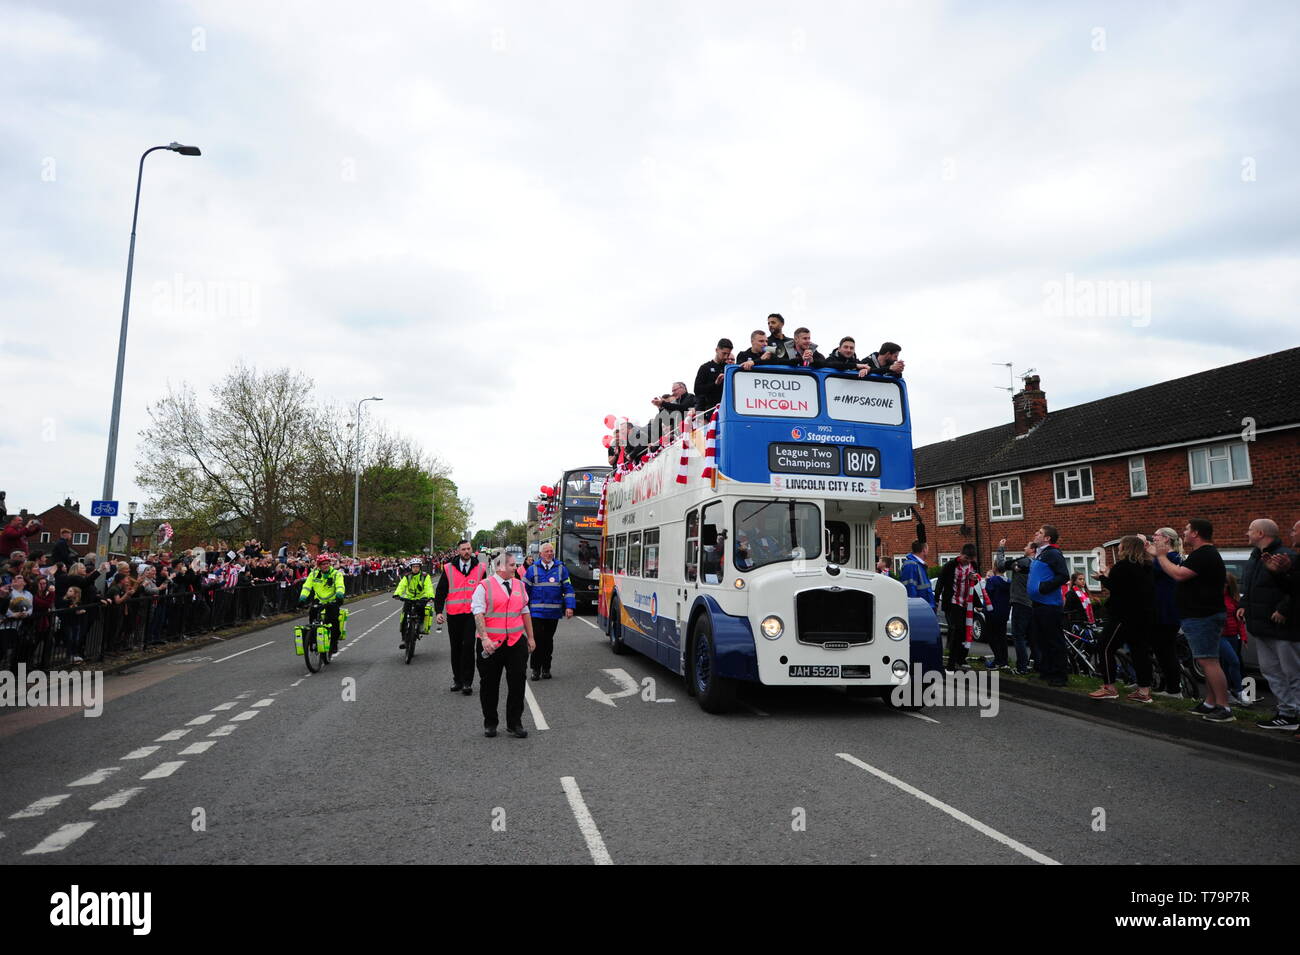 The player's bus during the victory parade through Lincoln City centre. Stock Photo